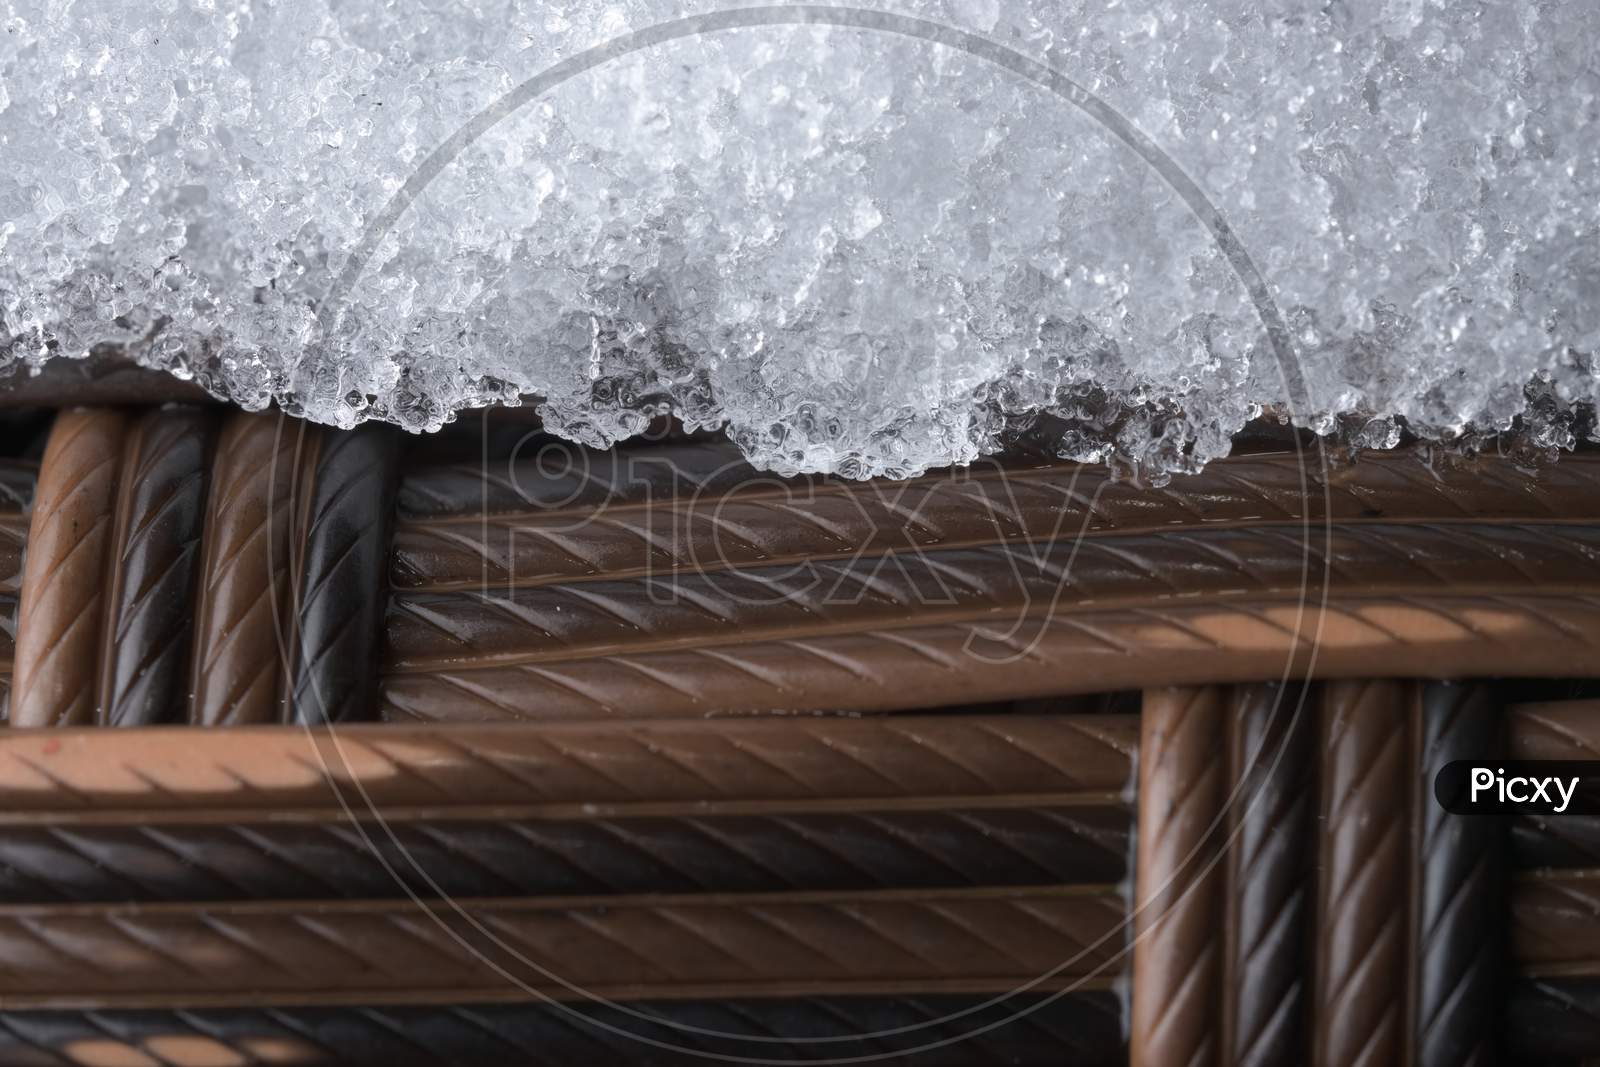 Icy Plastic Garden Furniture. Rattan Style Weave, But Synthetic Material.